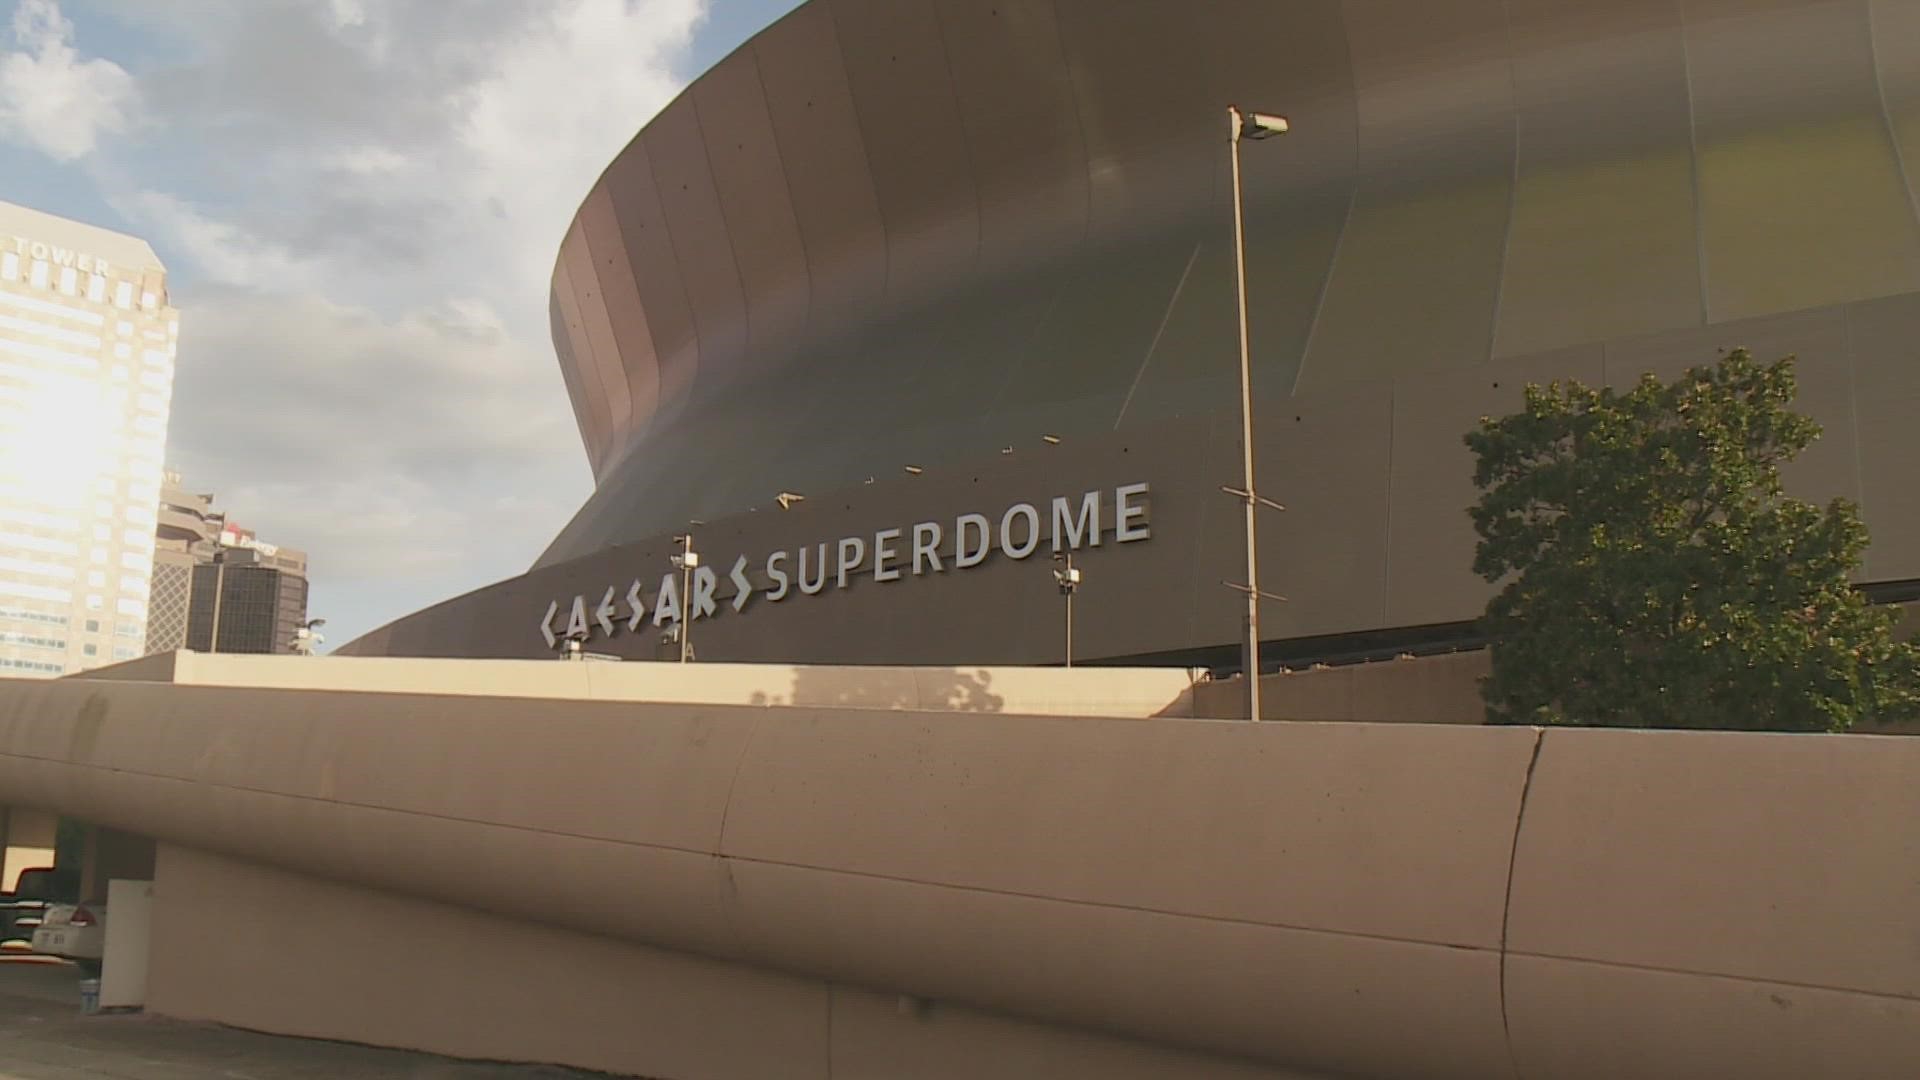 The vaccine mandate also includes home games at the Superdome meaning in order to enter you need to be vaccinated or be negative for covid or you will be refunded.